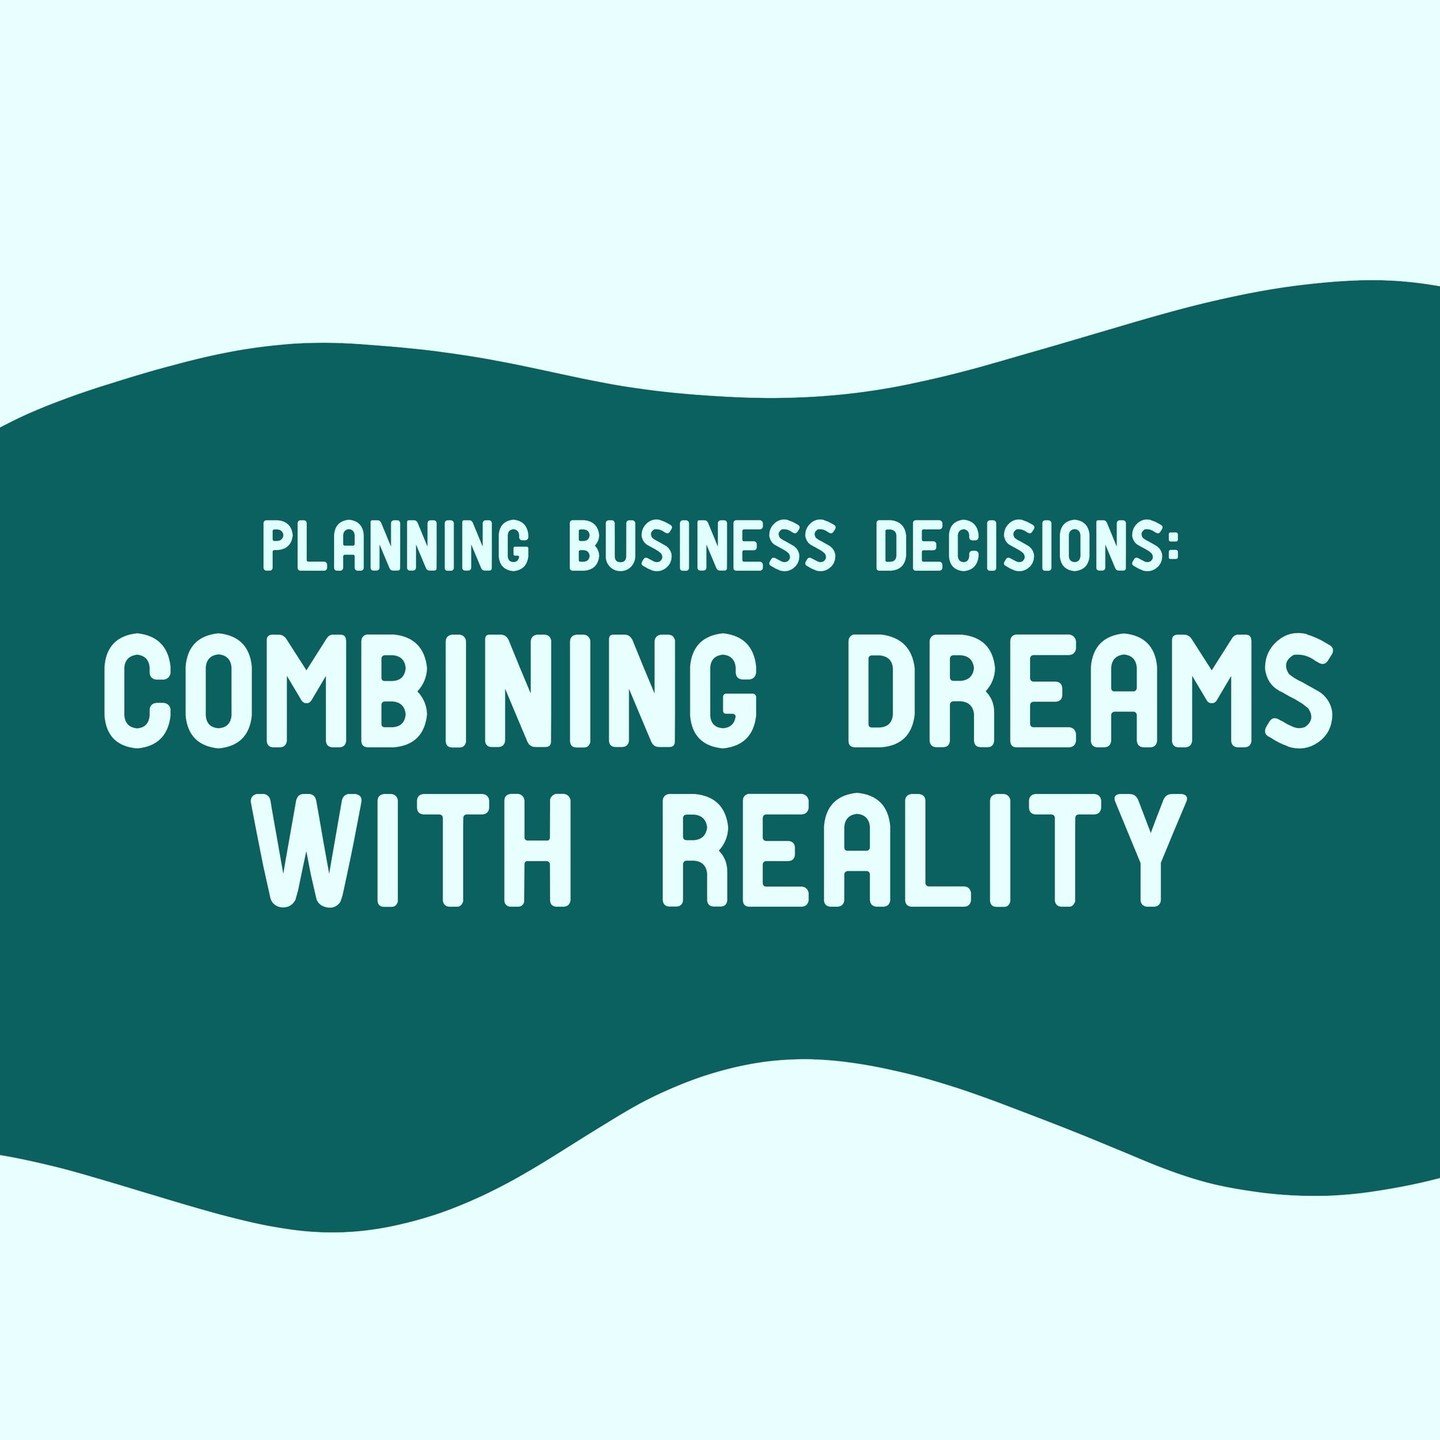 When you&rsquo;re making a big financial decision in your business, it&rsquo;s important to mix dreams with reality. 

Instead of just keeping yourself to stark reality or only allowing yourself to hold the loftiest dreams, let&rsquo;s do it all at o